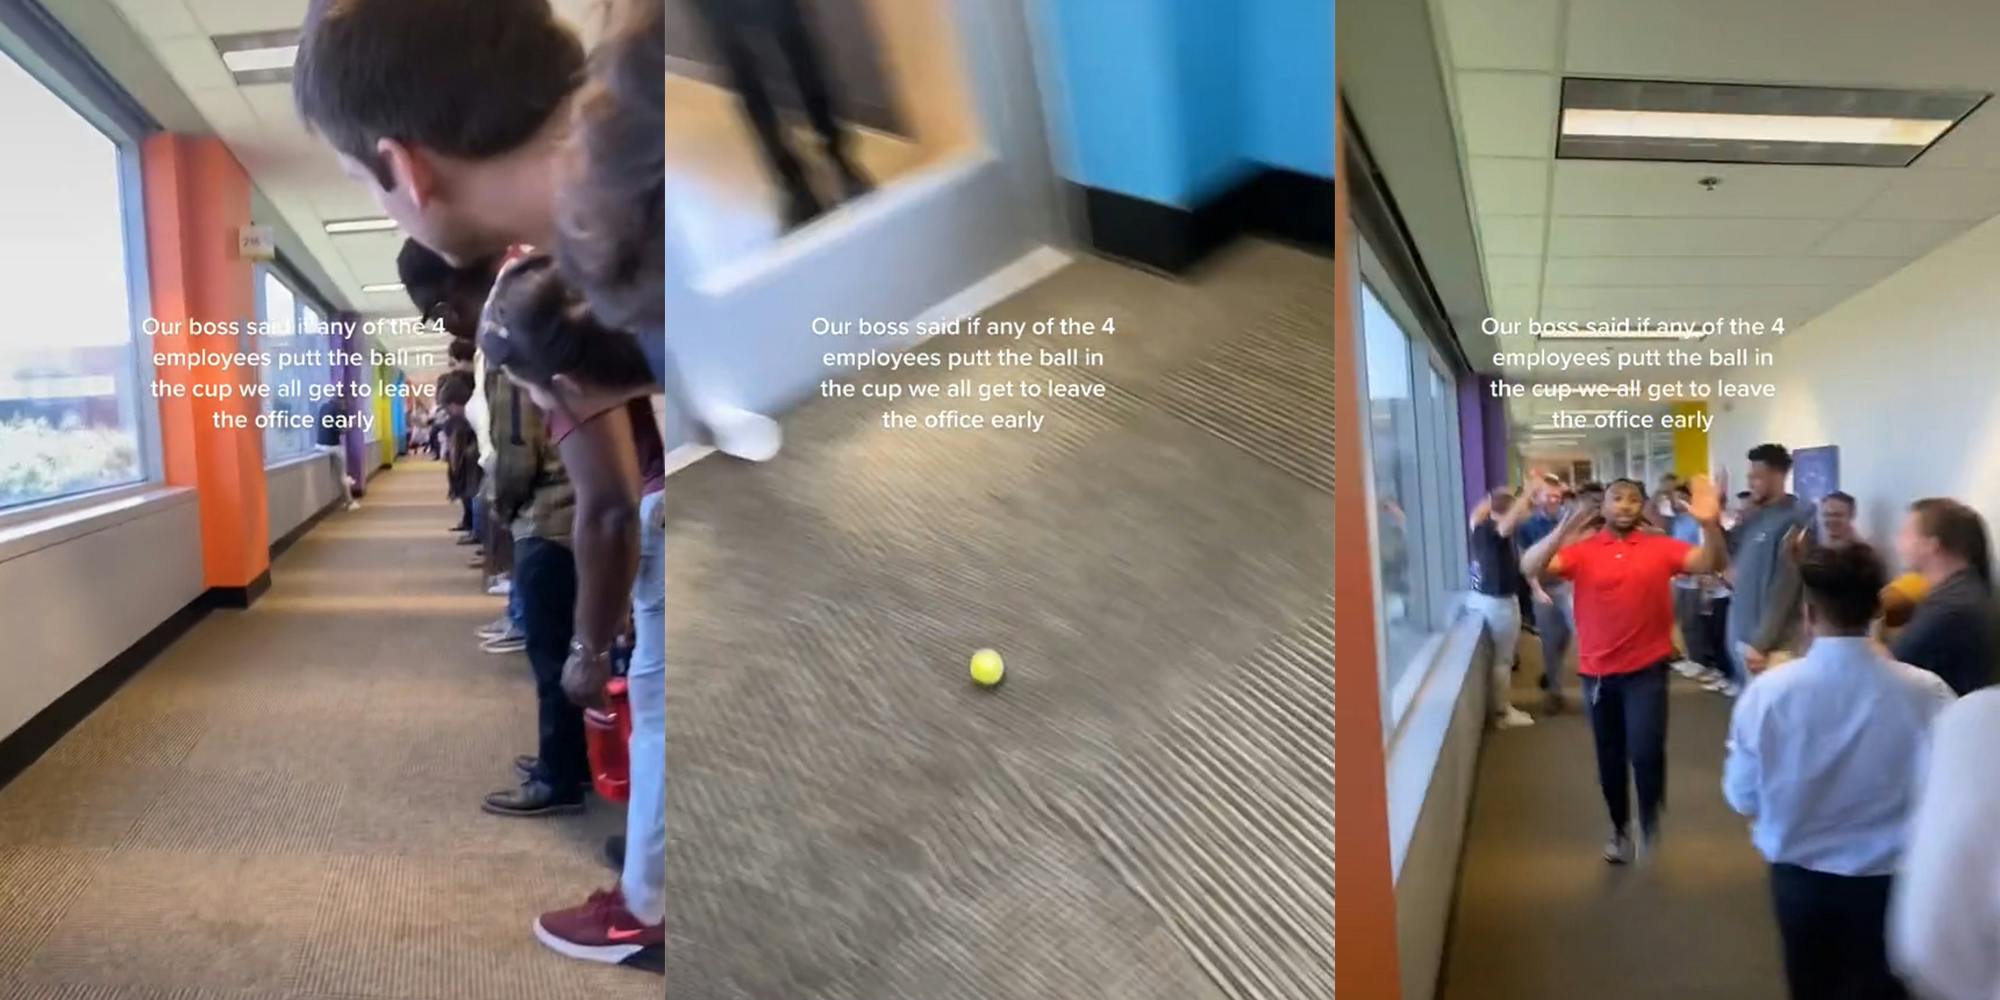 people leaning in hallway watching golf ball (l) golf ball about to enter cup (c) man celebrating with co-workers cheering in hallway (r) all with caption "our boss said if any of the 4 employees putt the ball in the cup we all get to leave the office early"